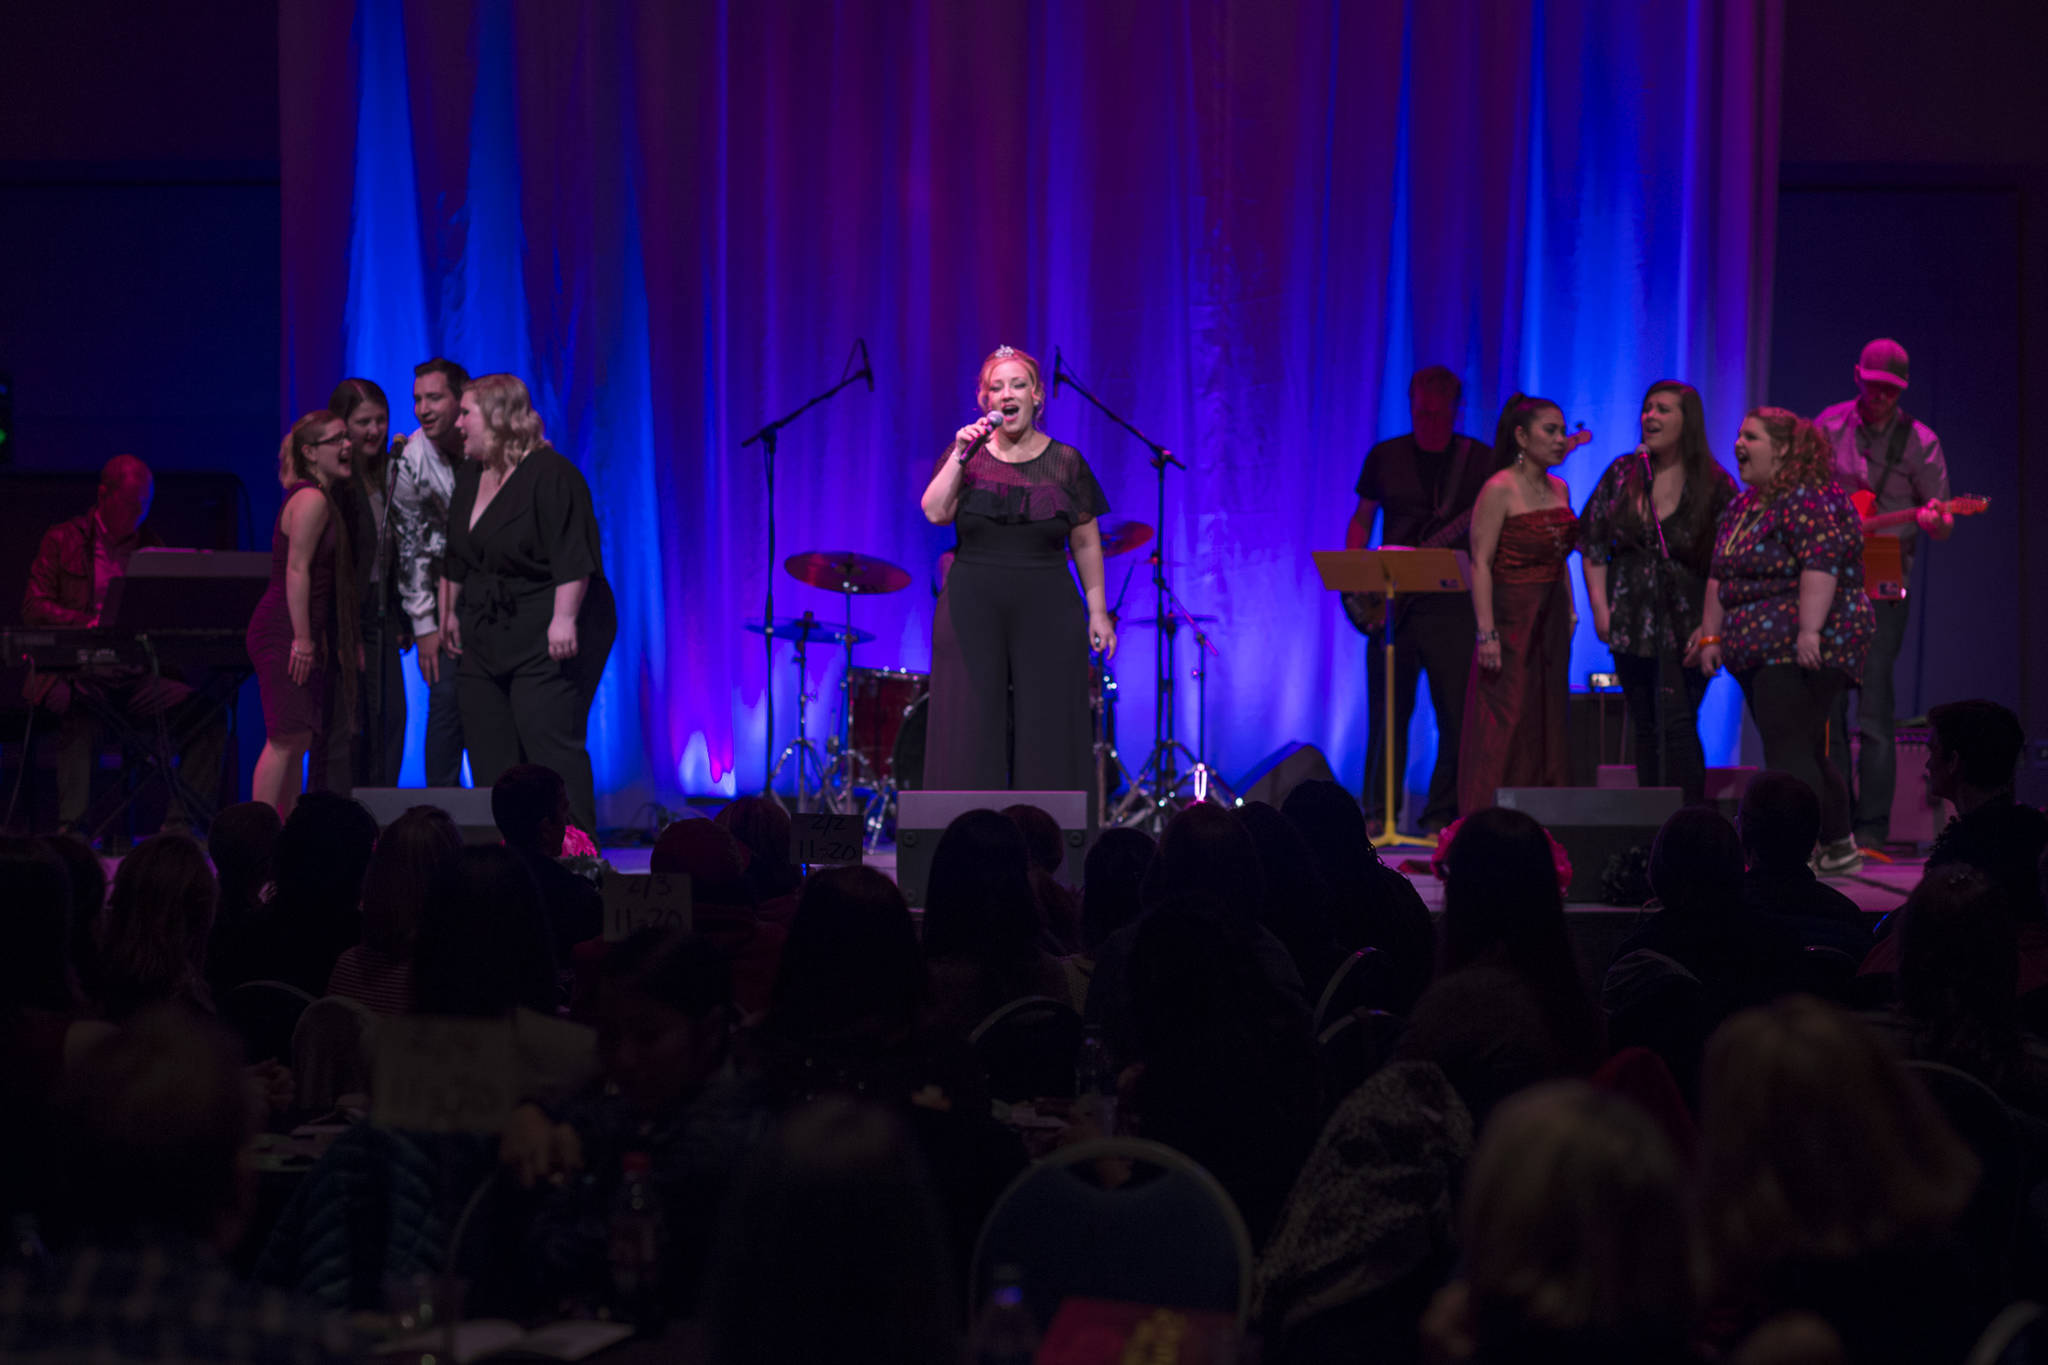 Reigning 2016 Diva Robin Thomas sings a final number at Juneau Lyric Opera’s production of “Who’s Your Diva?” at Centennial Hall on Saturday, Sept. 29, 2018. (Michael Penn | Juneau Empire)                                Reigning 2016 Diva Robin Thomas sings a final number at Juneau Lyric Opera’s production of “Who’s Your Diva?” at Centennial Hall on Saturday, Sept. 29, 2018. (Michael Penn | Juneau Empire)